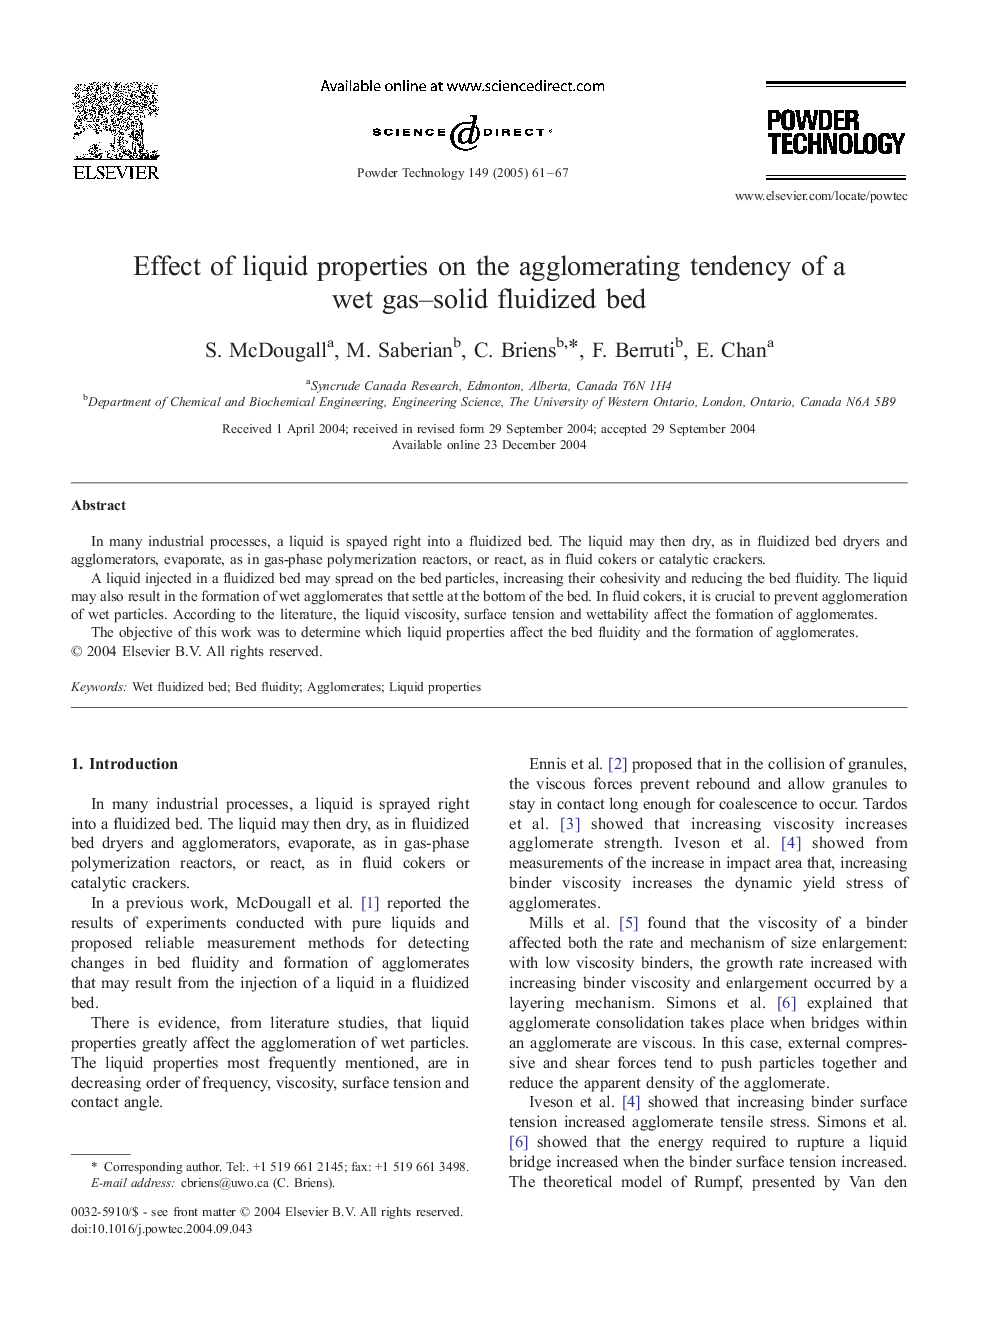 Effect of liquid properties on the agglomerating tendency of a wet gas-solid fluidized bed